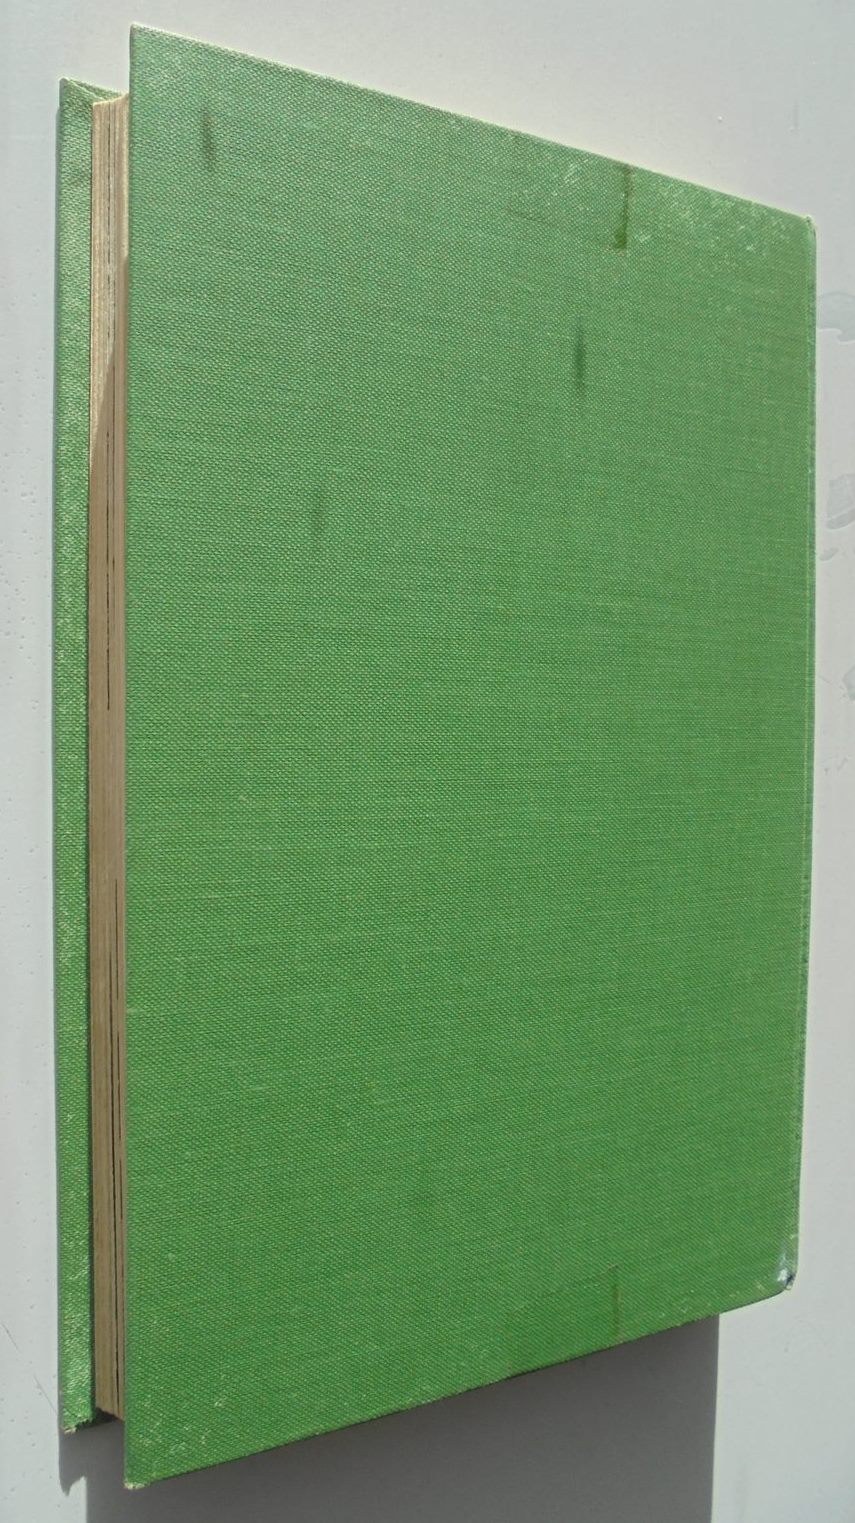 The Heart of Fiordland. SIGNED 1st edition. By George A. Howard